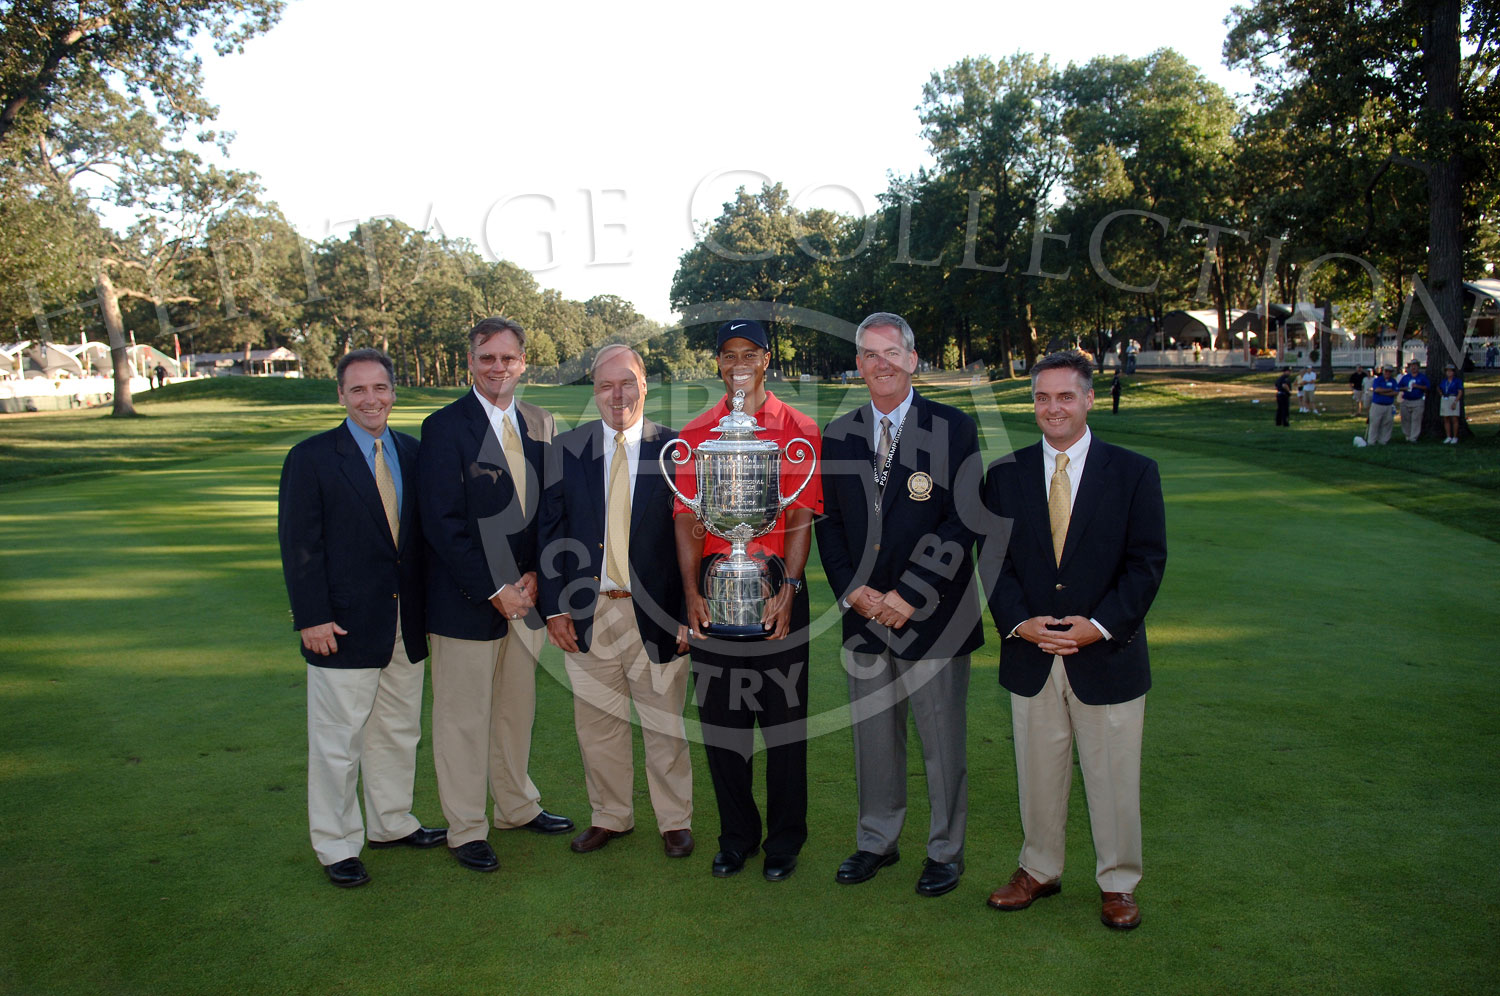 Section directors: Executive Director Michael Miller, President Don Piper, Vice President Terry Russell, Secretary Trey Van Dyke and District Director Tim Marks with Tiger Woods after the 88th PGA Championship in Medinah, Illinois. Sunday, August 20, 2006